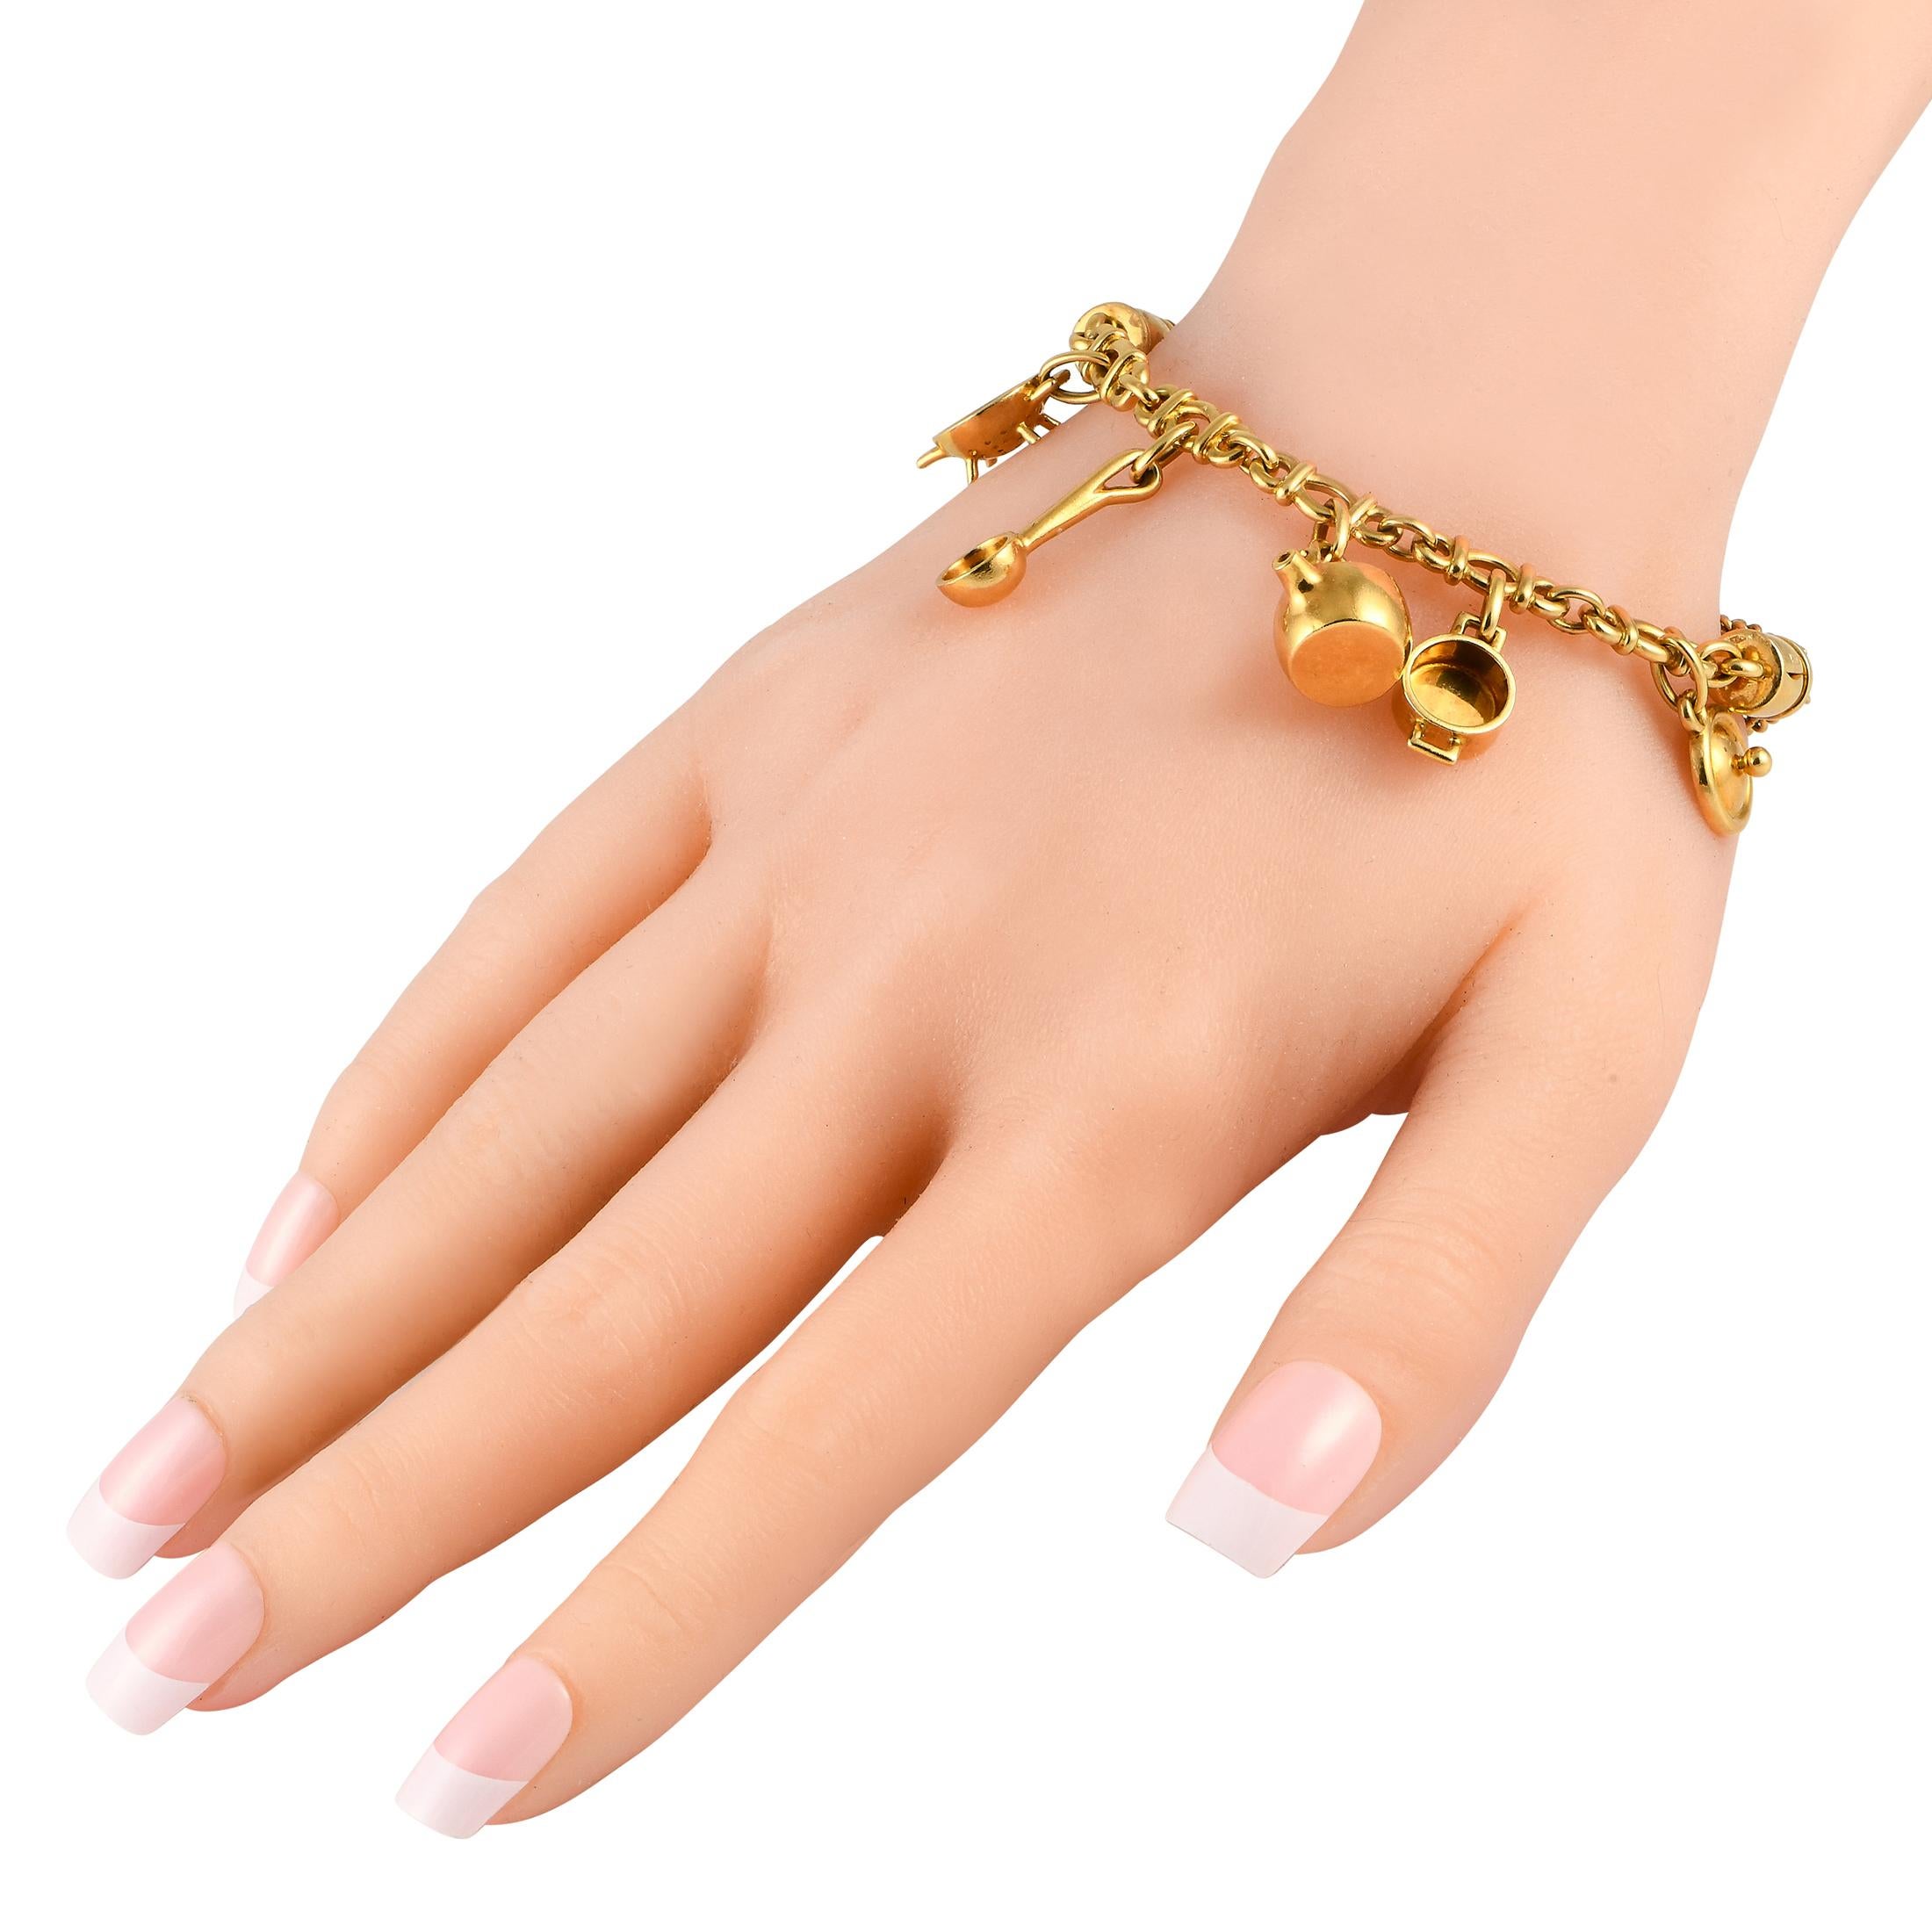 A series of kitchen inspired charms ensure this Pomellato charm bracelet will continually capture your imagination. Crafted from 18K Yellow Gold, this timeless piece features a bold chain base that measures 7.5 long.This jewelry piece is offered in